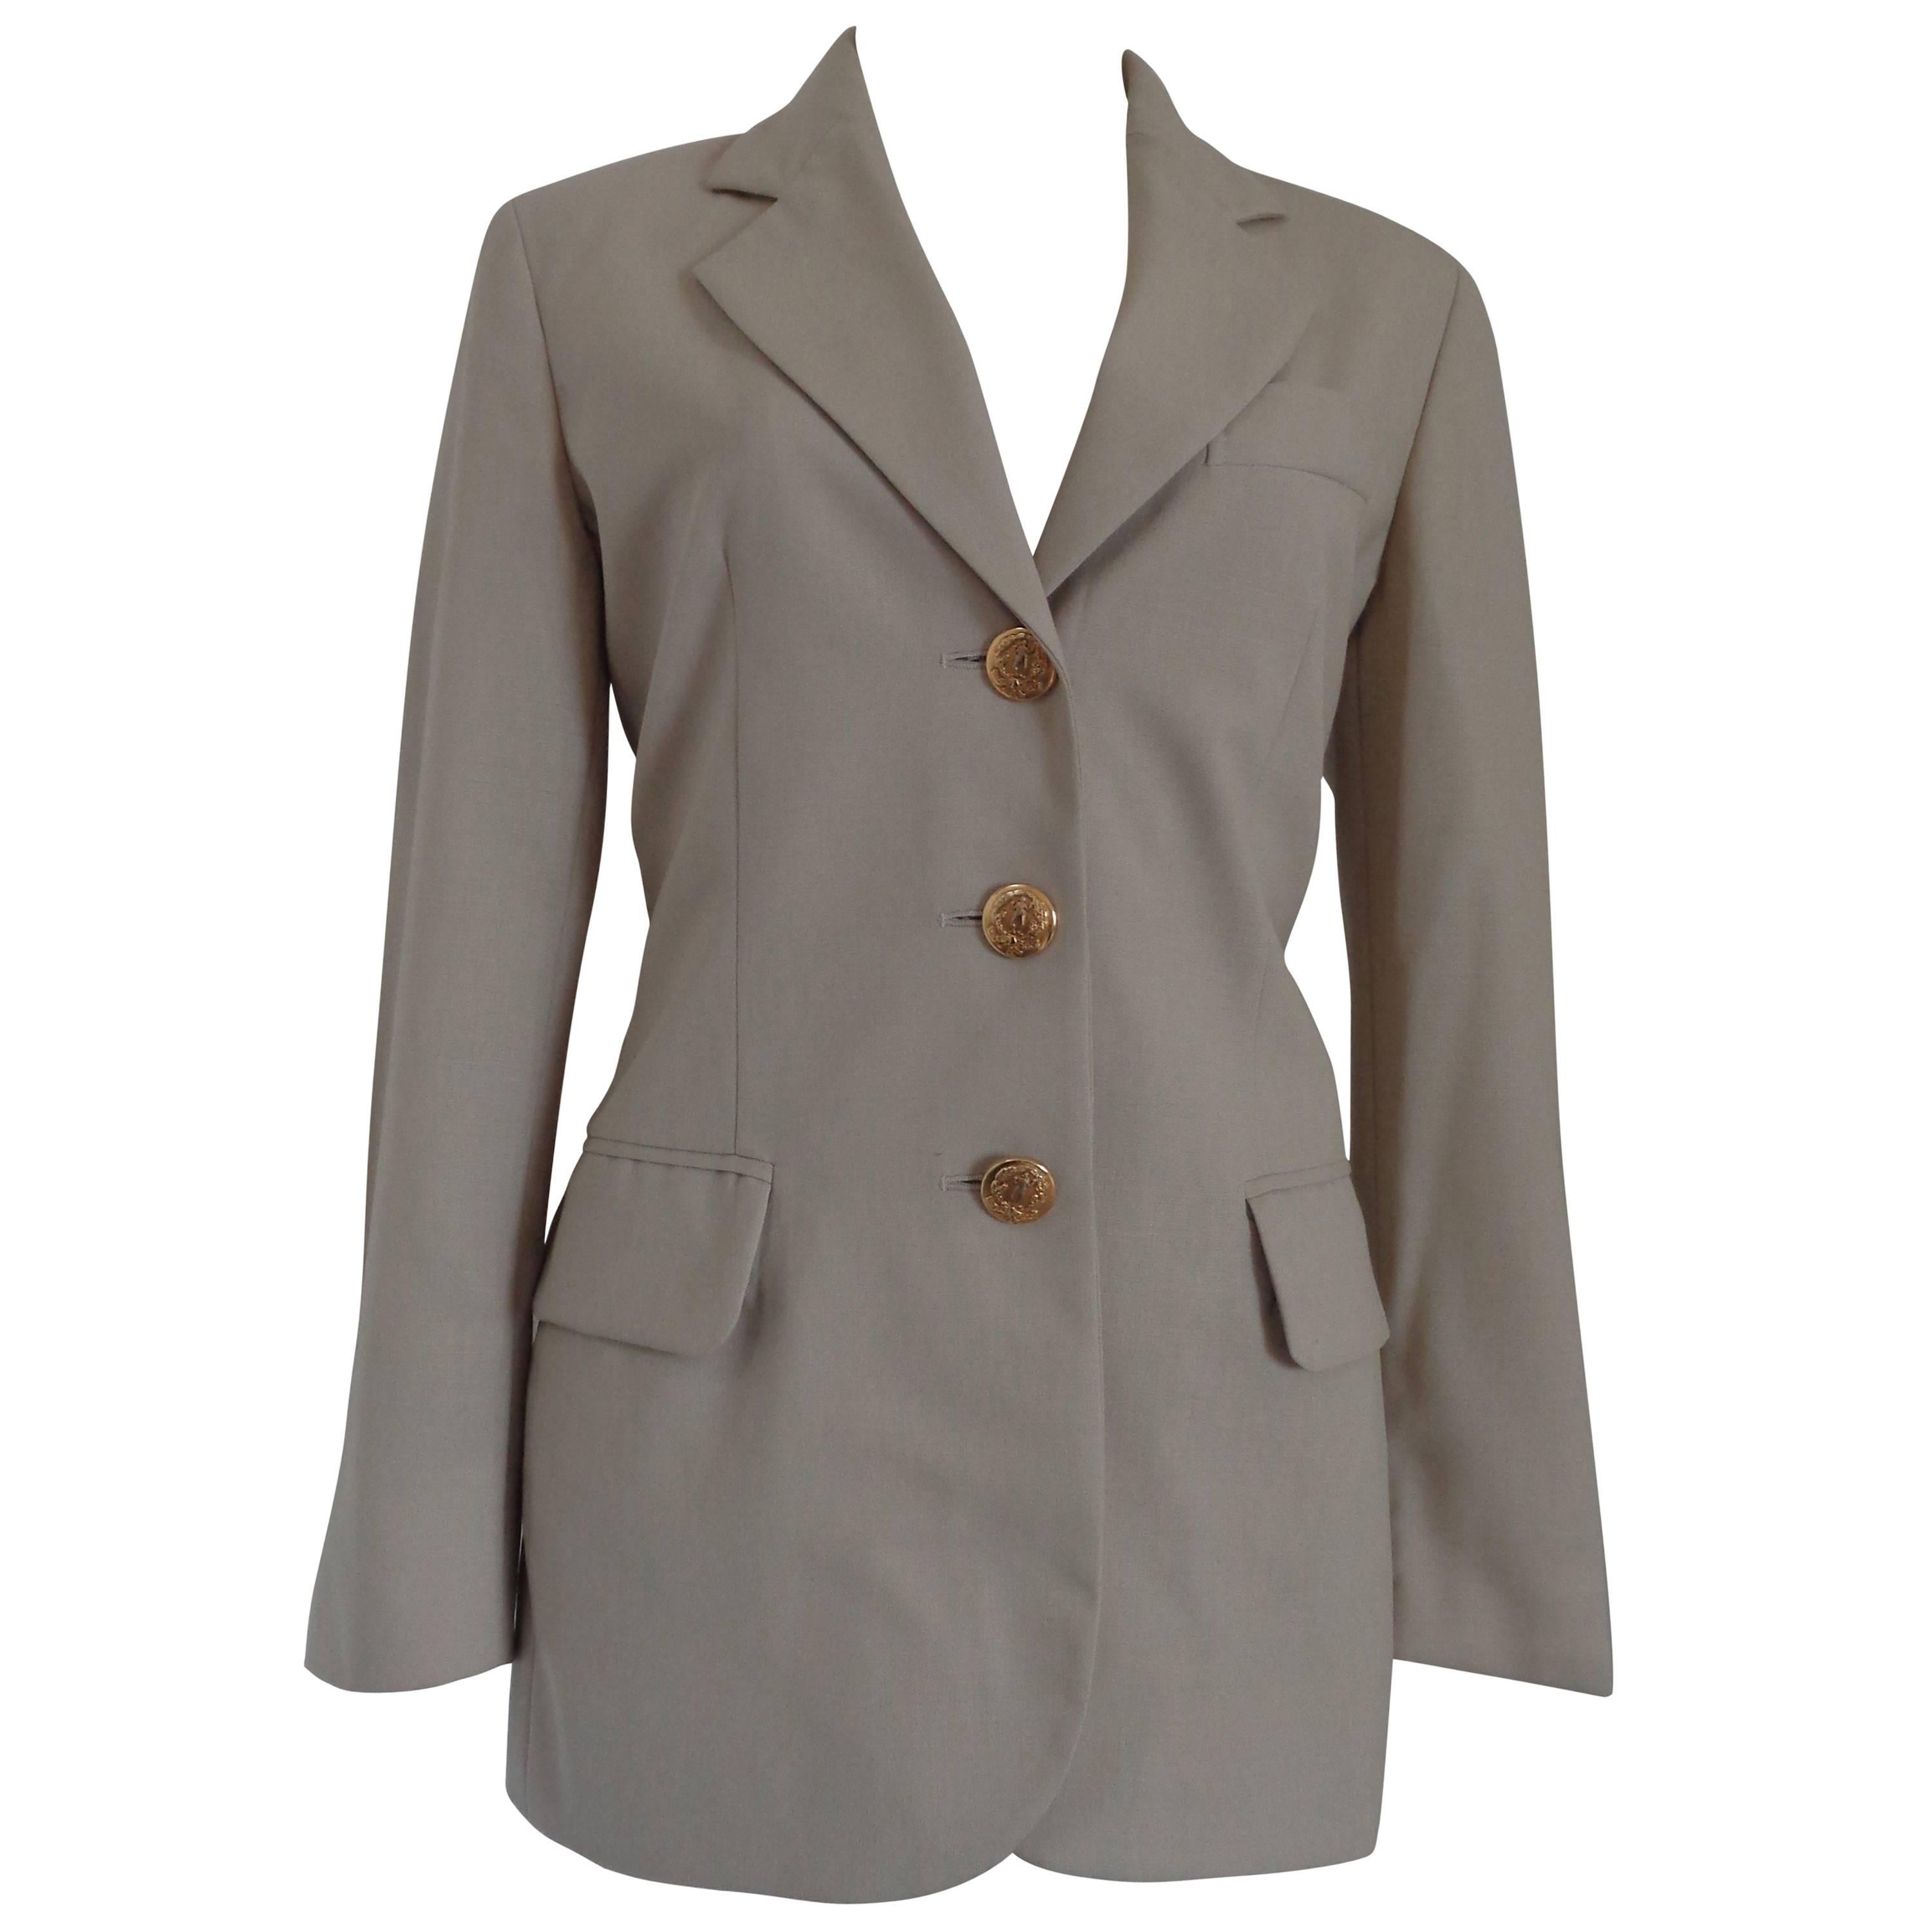 Moschino Cheap & Chic beije Wool Jacket For Sale